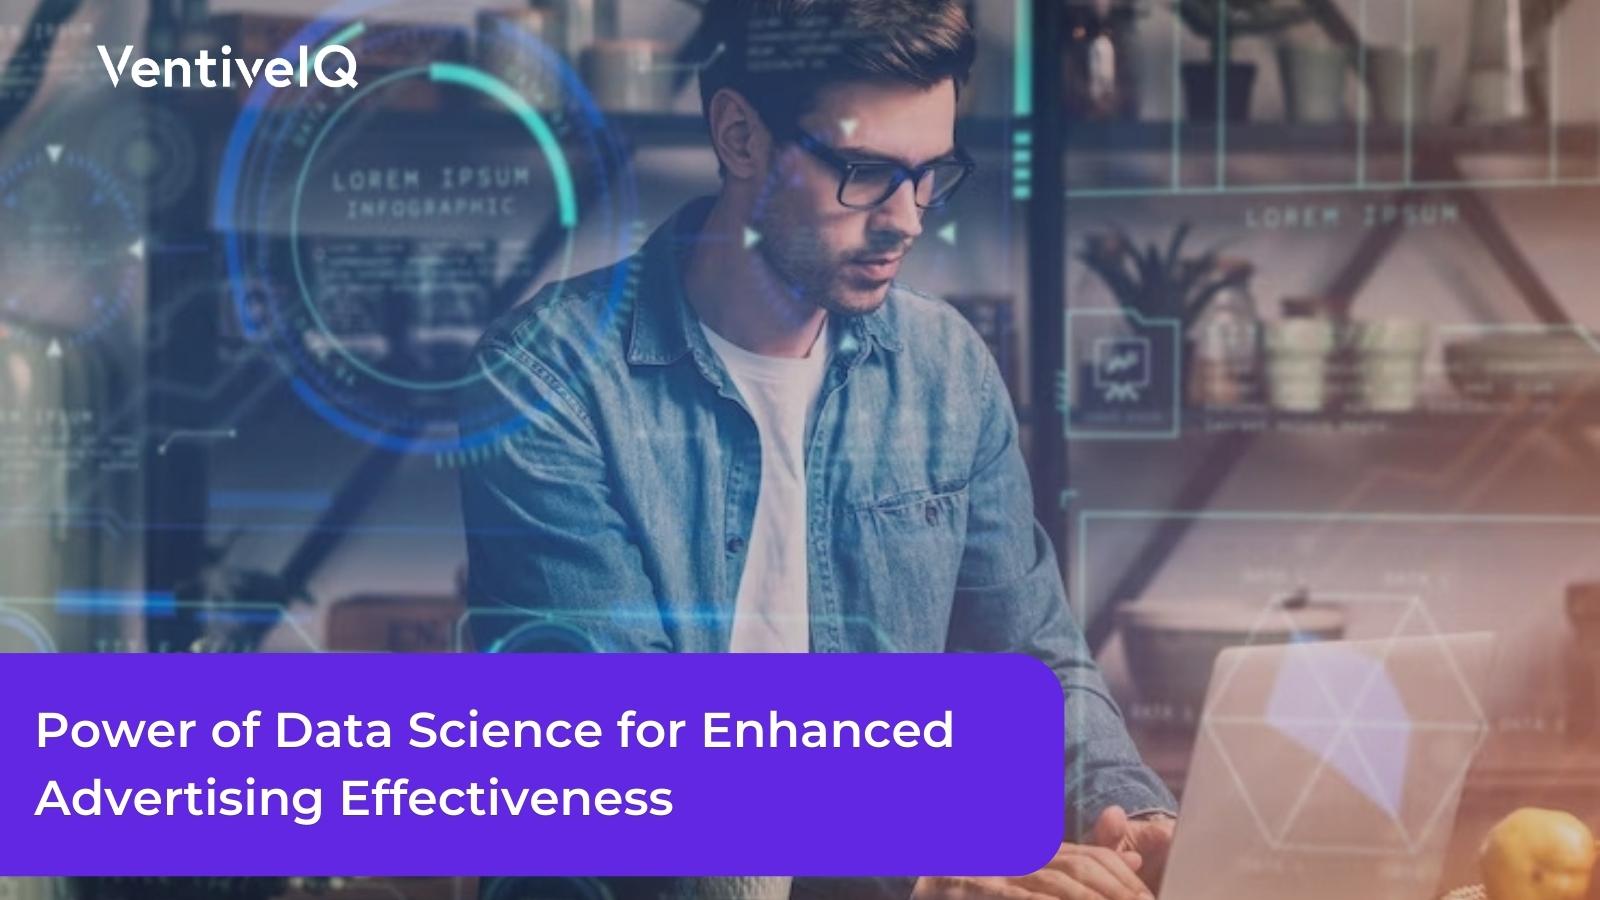 Harnessing the Power of Data Science for Enhanced Advertising Effectiveness